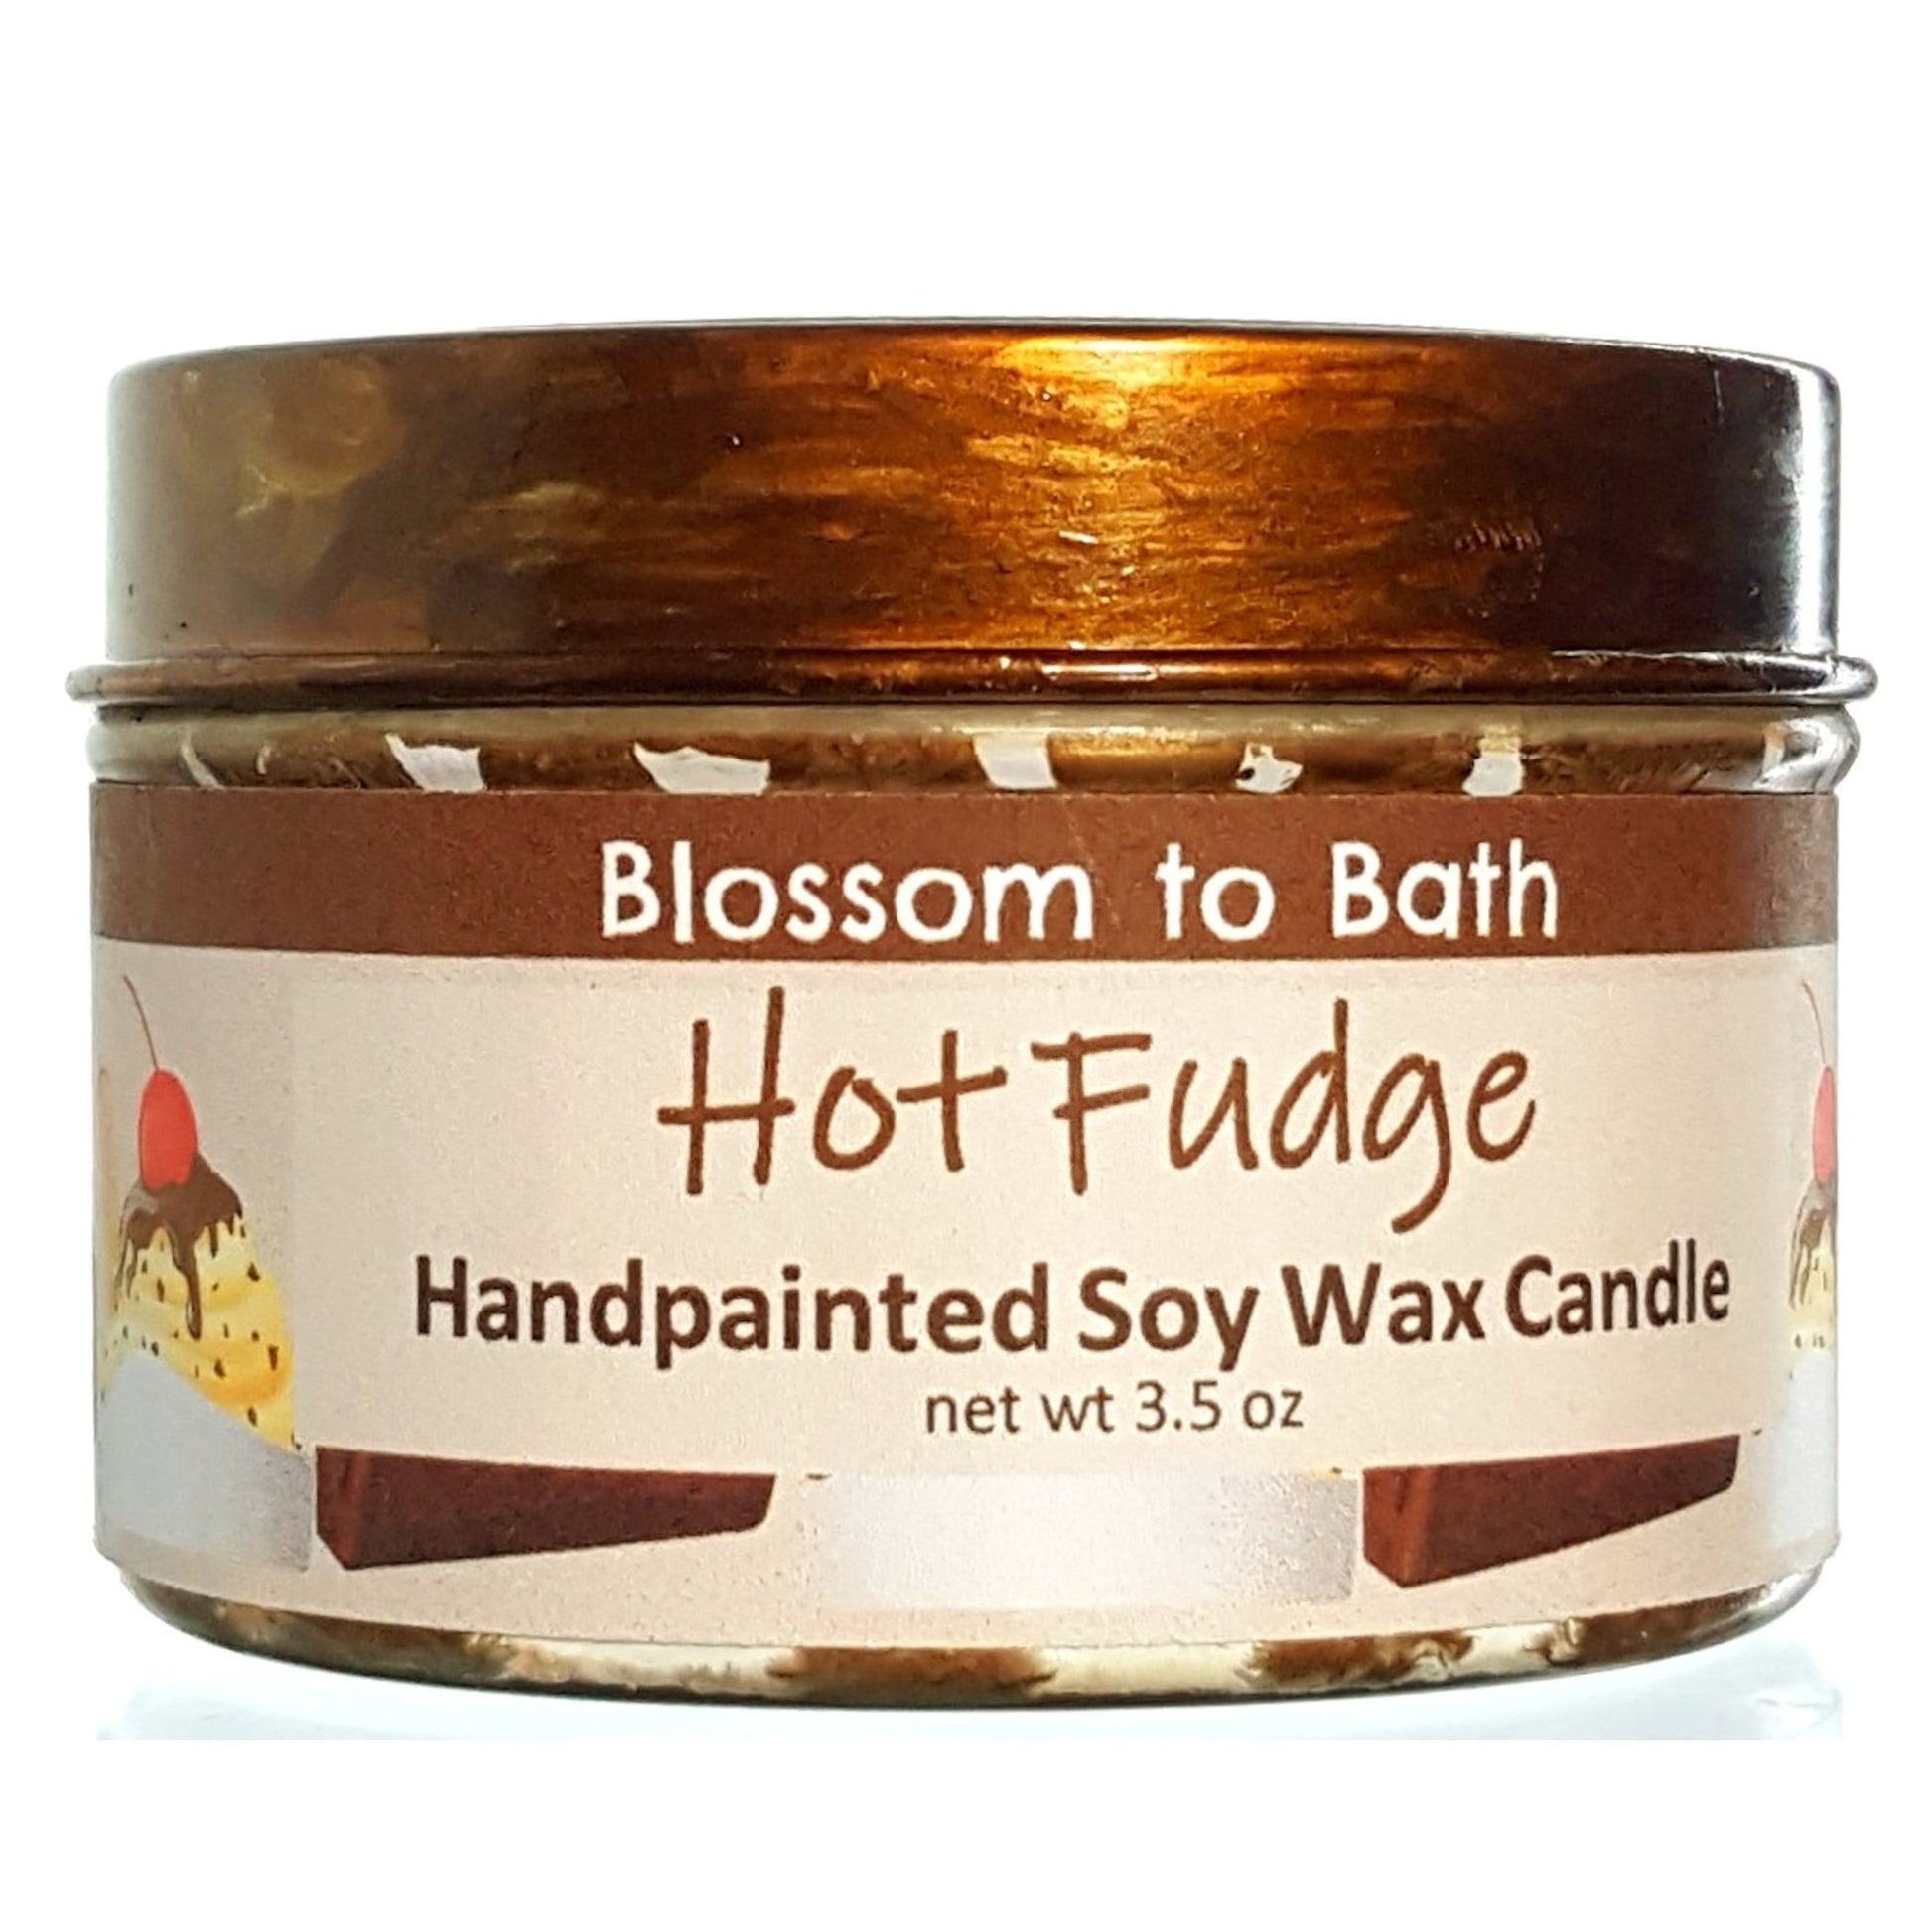 Buy Blossom to Bath Hot Fudge Handpainted Soy Wax Candle from Flowersong Soap Studio.  Enjoy one of a kind décor and fill the air with a charming fragrance that lasts for hours  The fragrance is three layers deep in rich chocolate.